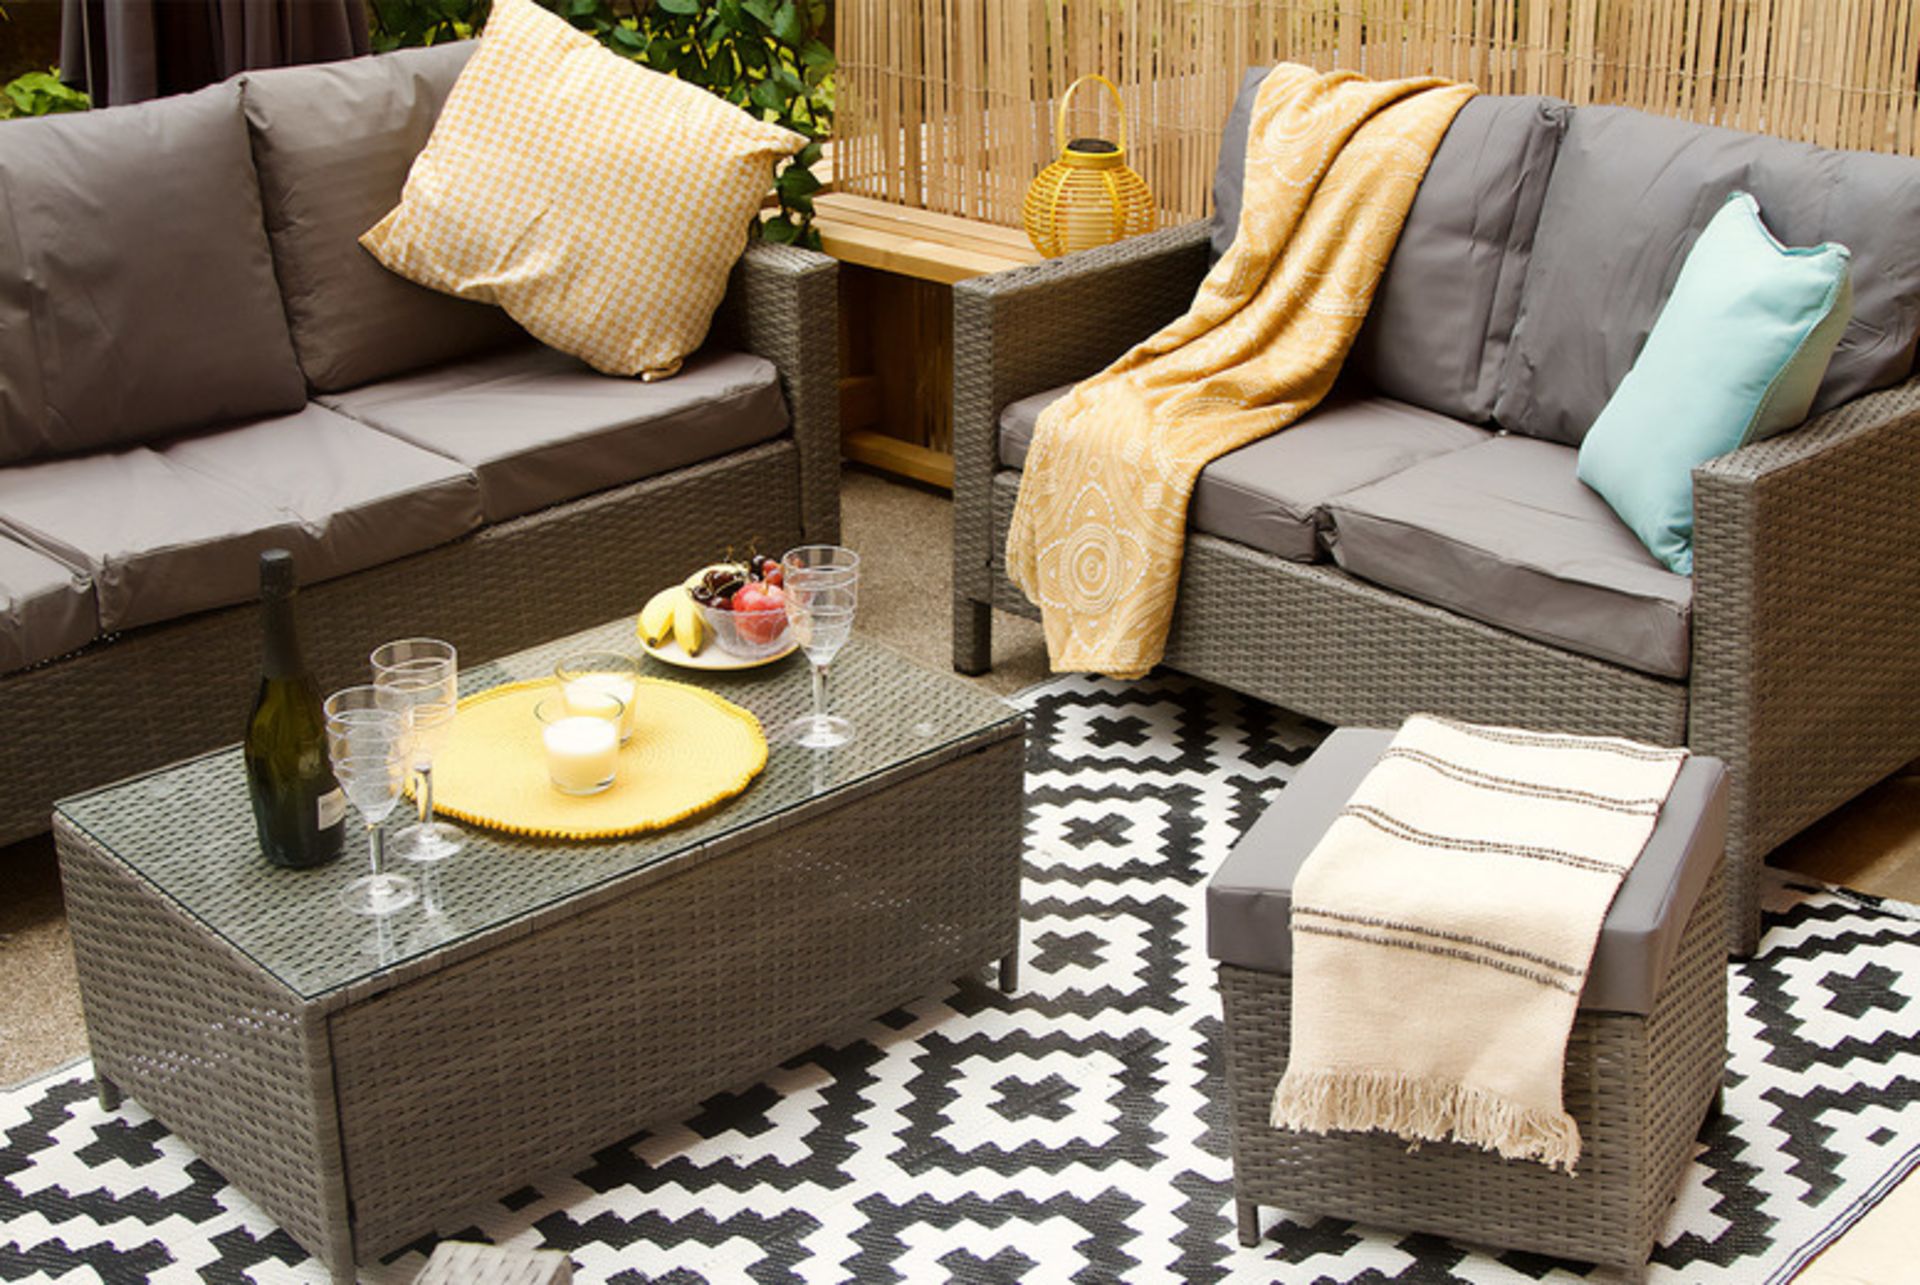 FREE DELIVERY - 8-SEATER RATTAN CHAIR & SOFA GARDEN FURNITURE SET - GREY - Image 3 of 5